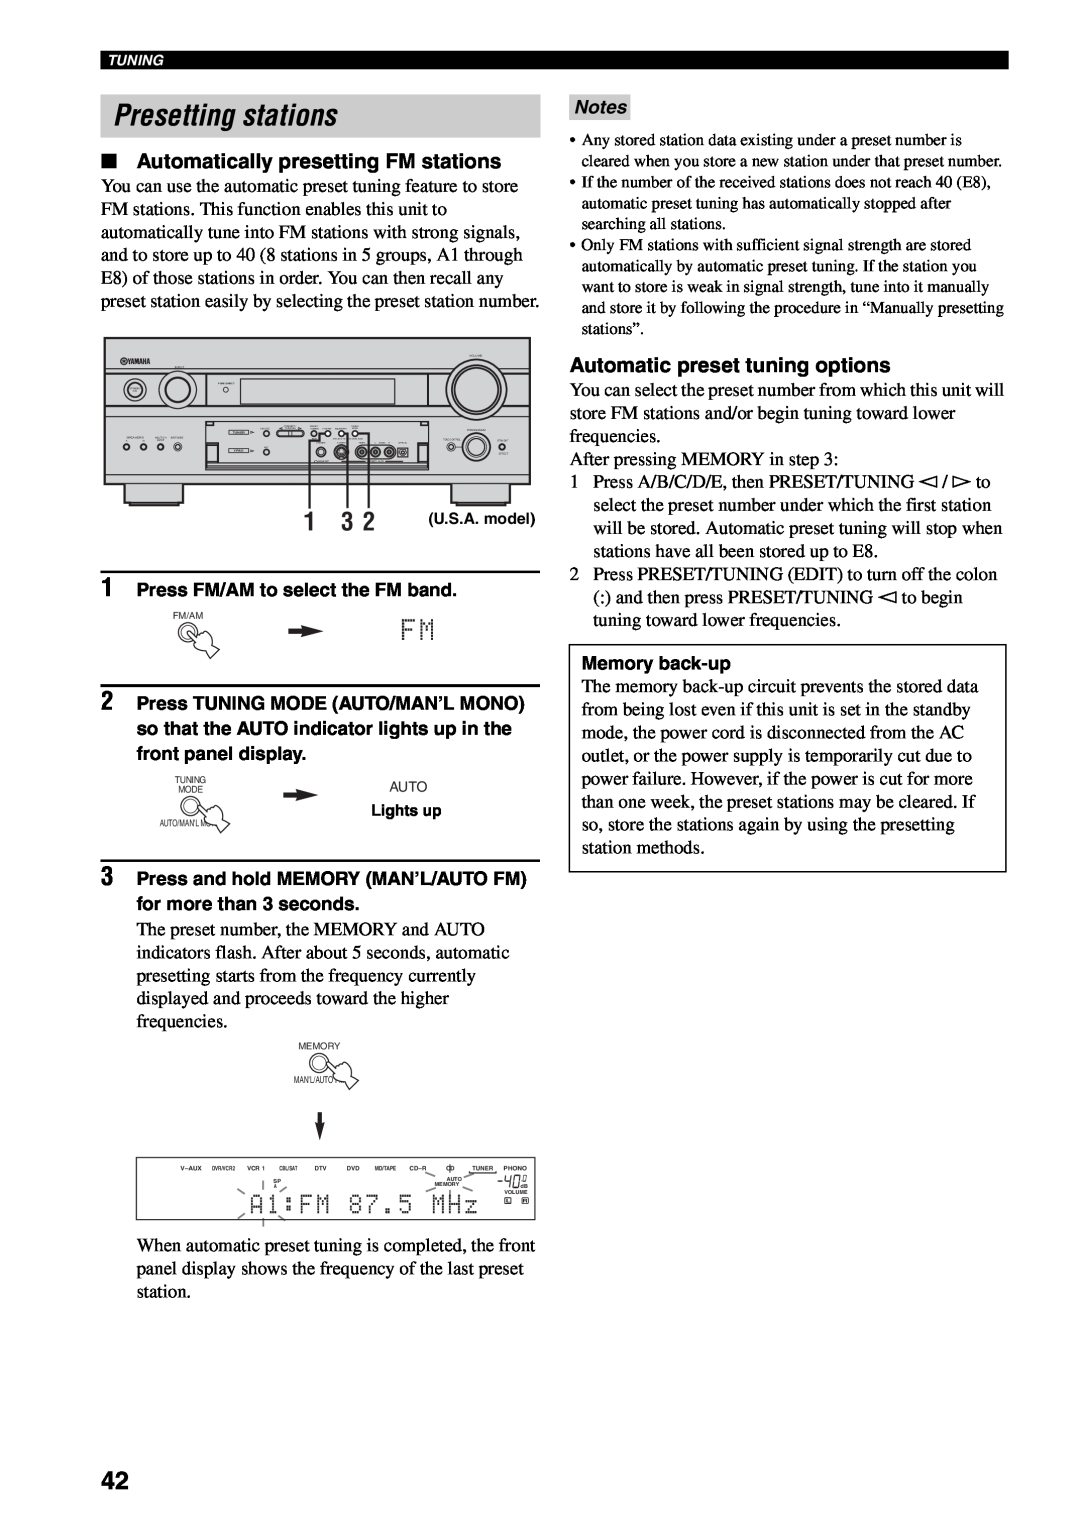 Yamaha RX-V1500 owner manual Presetting stations, A 1 : F M 8 7 . 5 M H z L R, Automatically presetting FM stations, Notes 